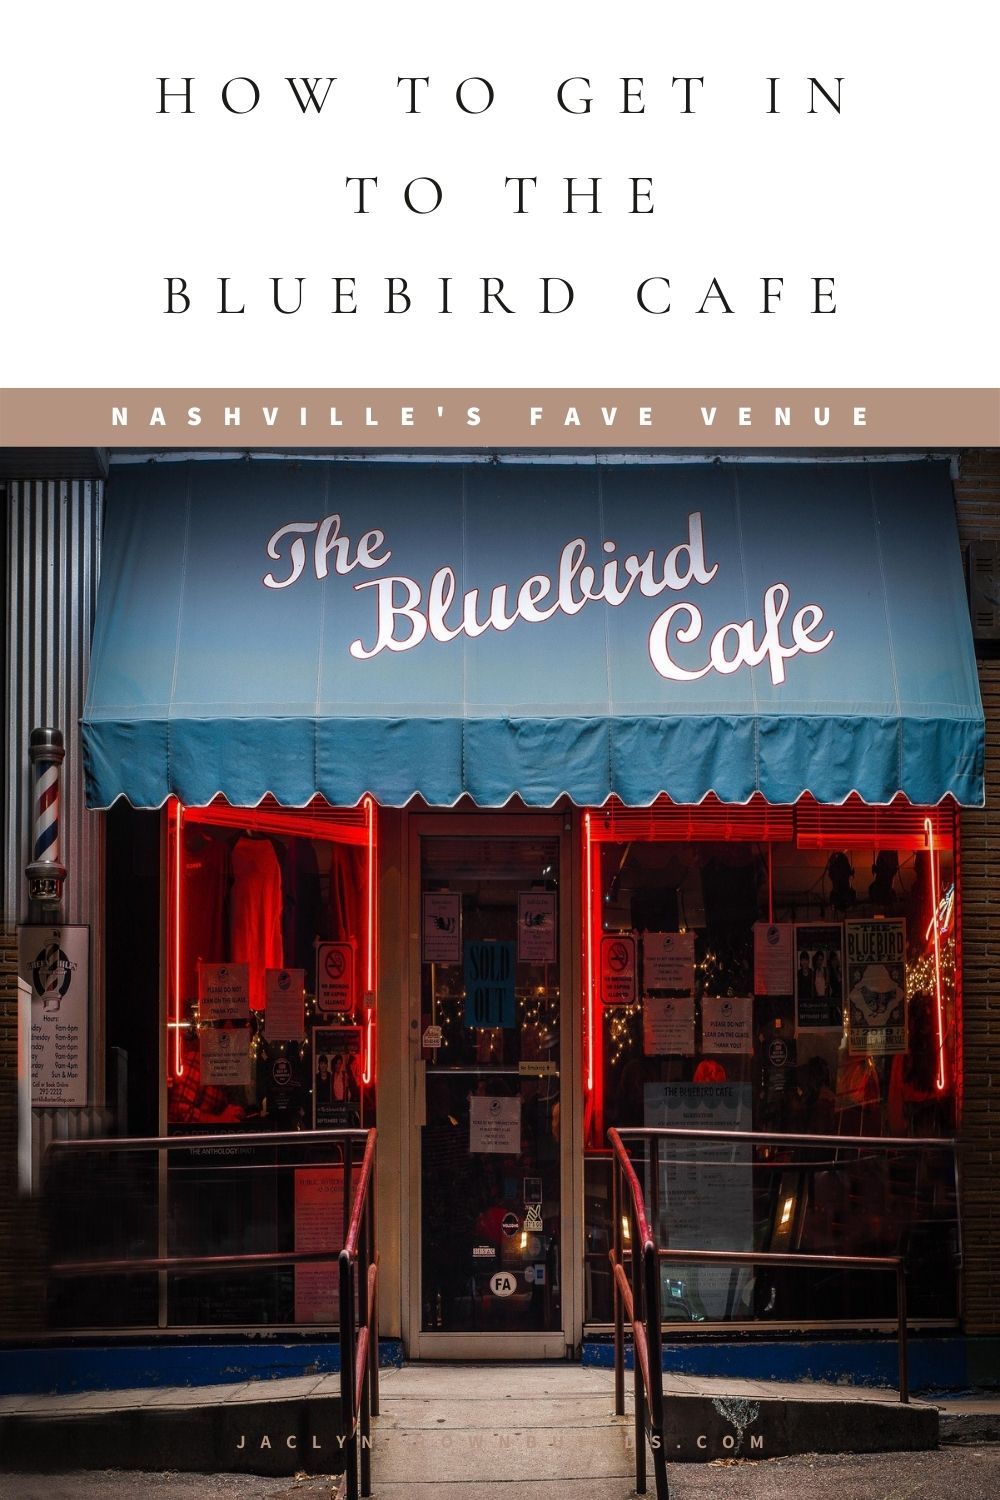 How to Get in to the Bluebird Cafe